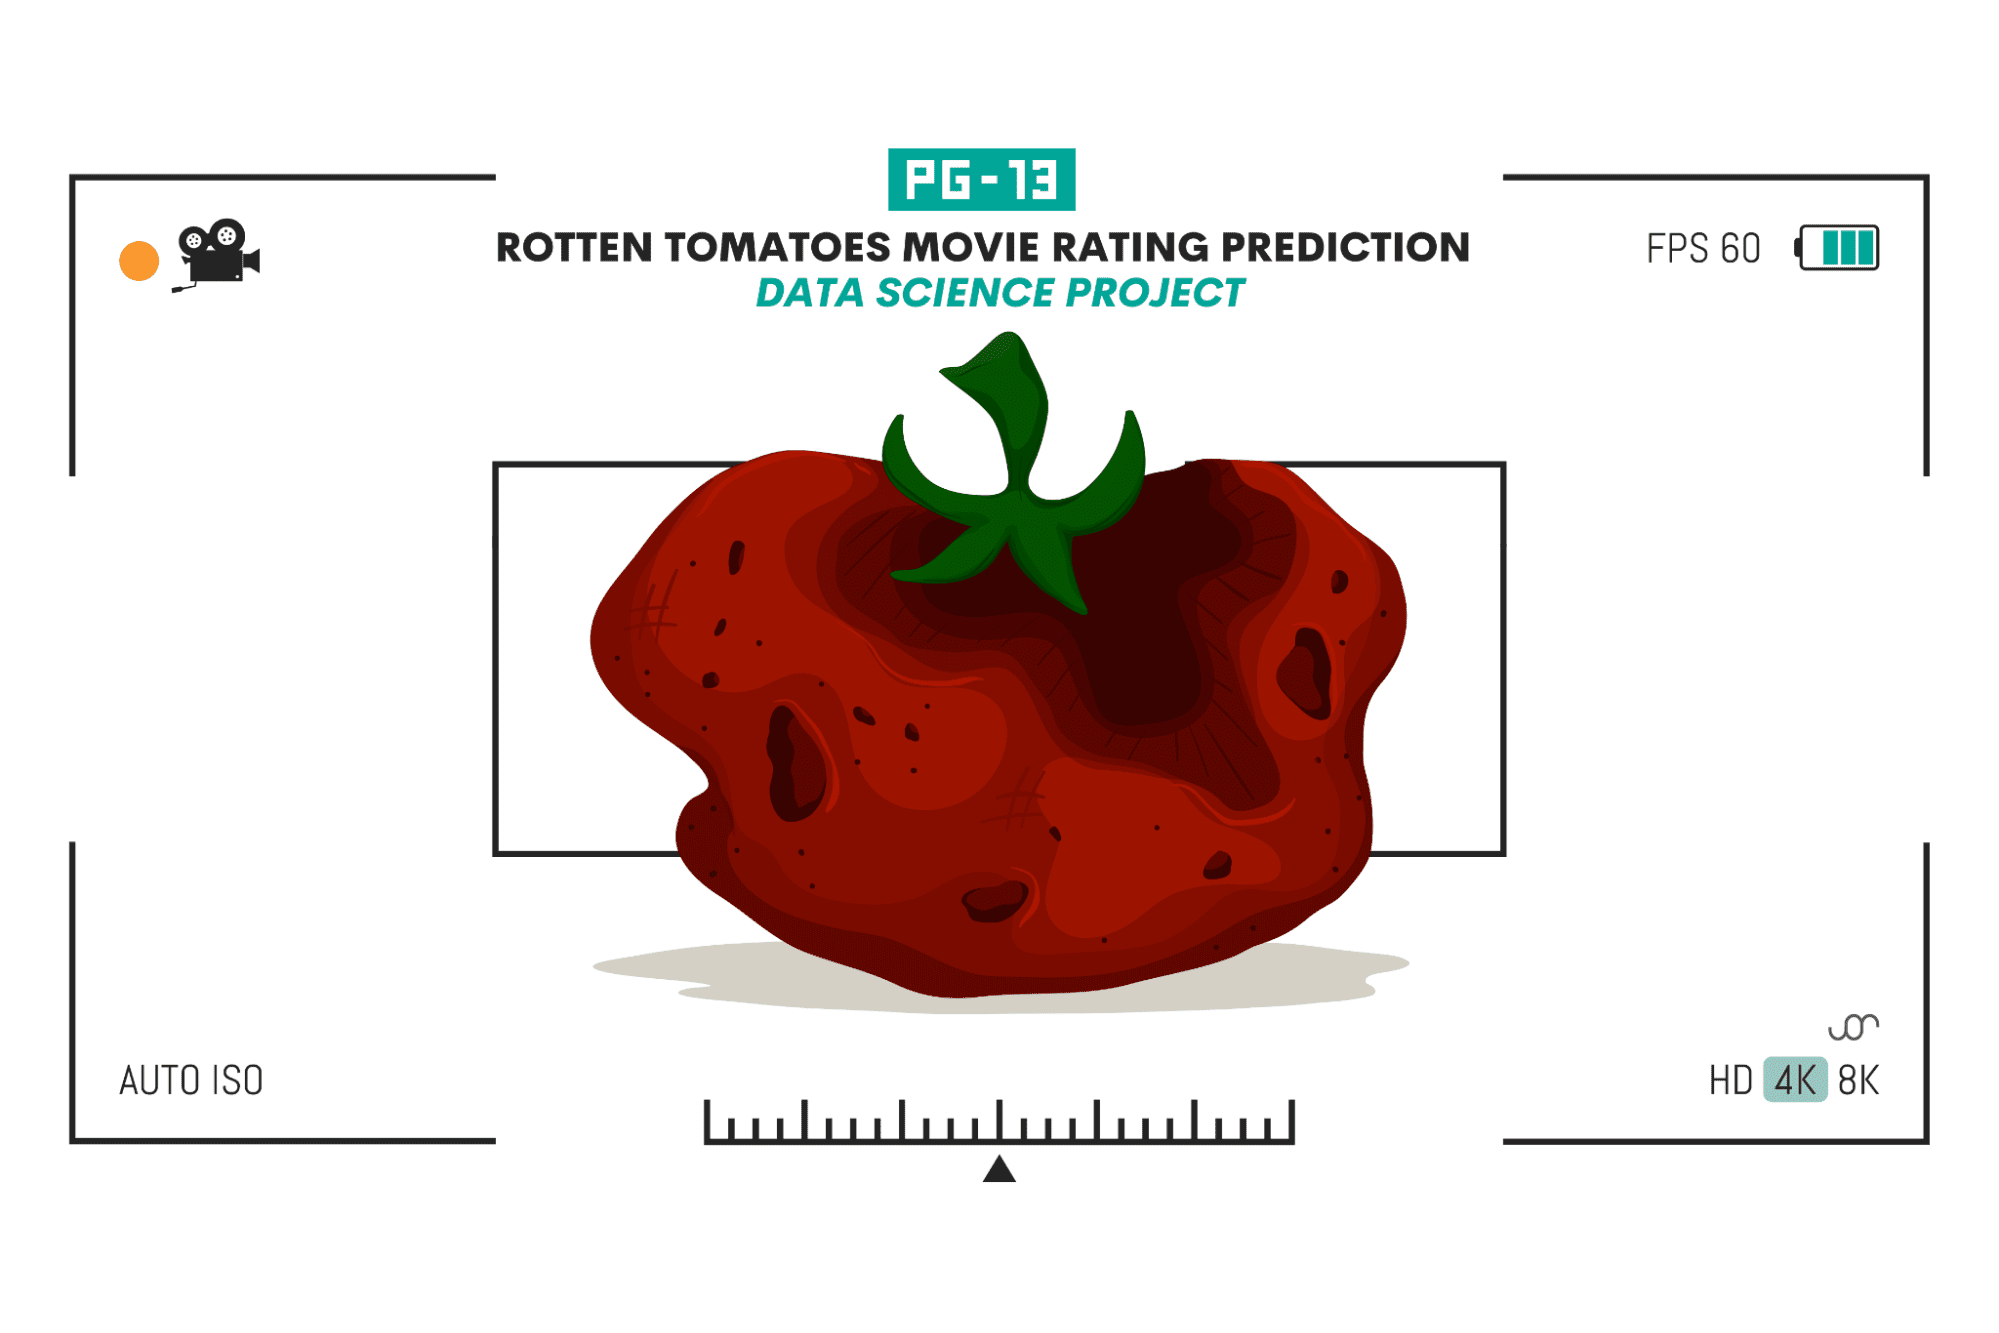 On rotten tomato - RoP critics rating has dropped lower than HotD